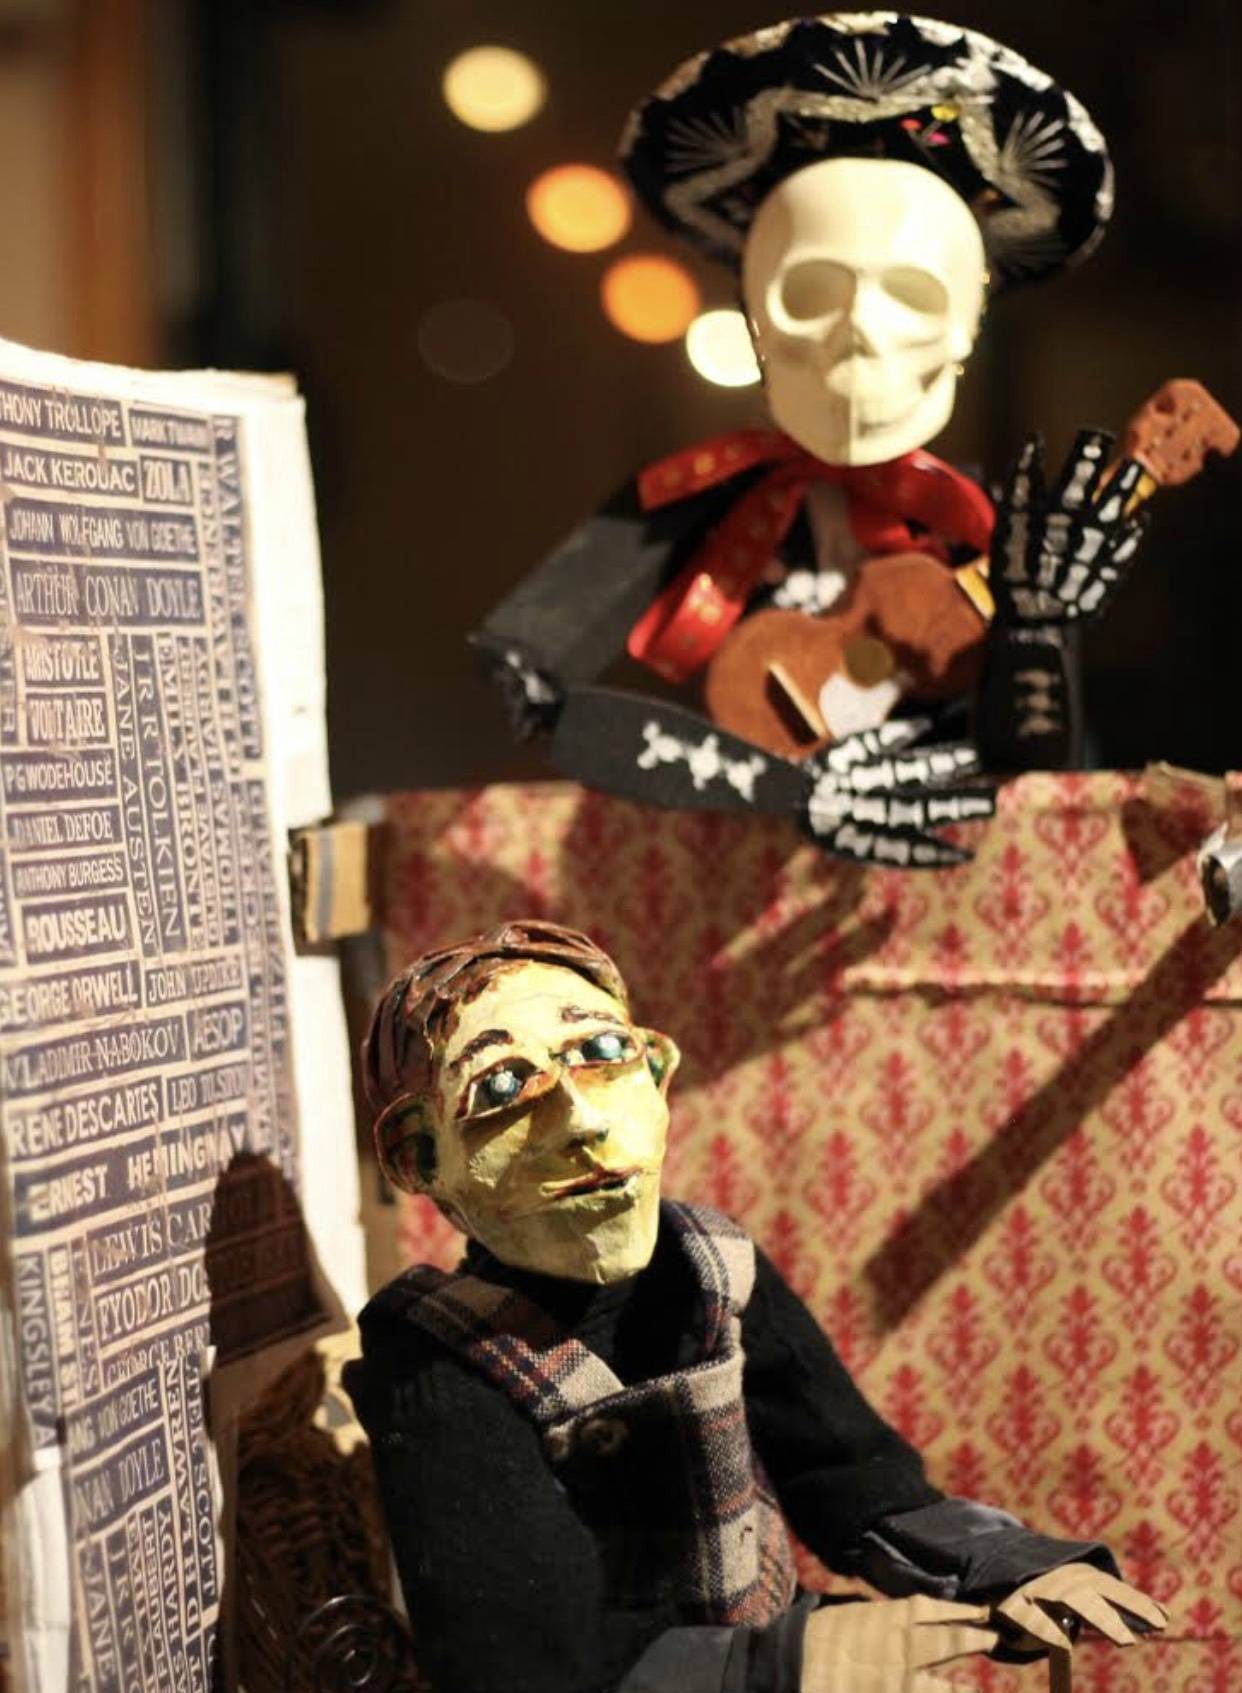 Puppets by Manuel Alvarez will be included in a poetry slam on April 6 (Courtesy Photo).